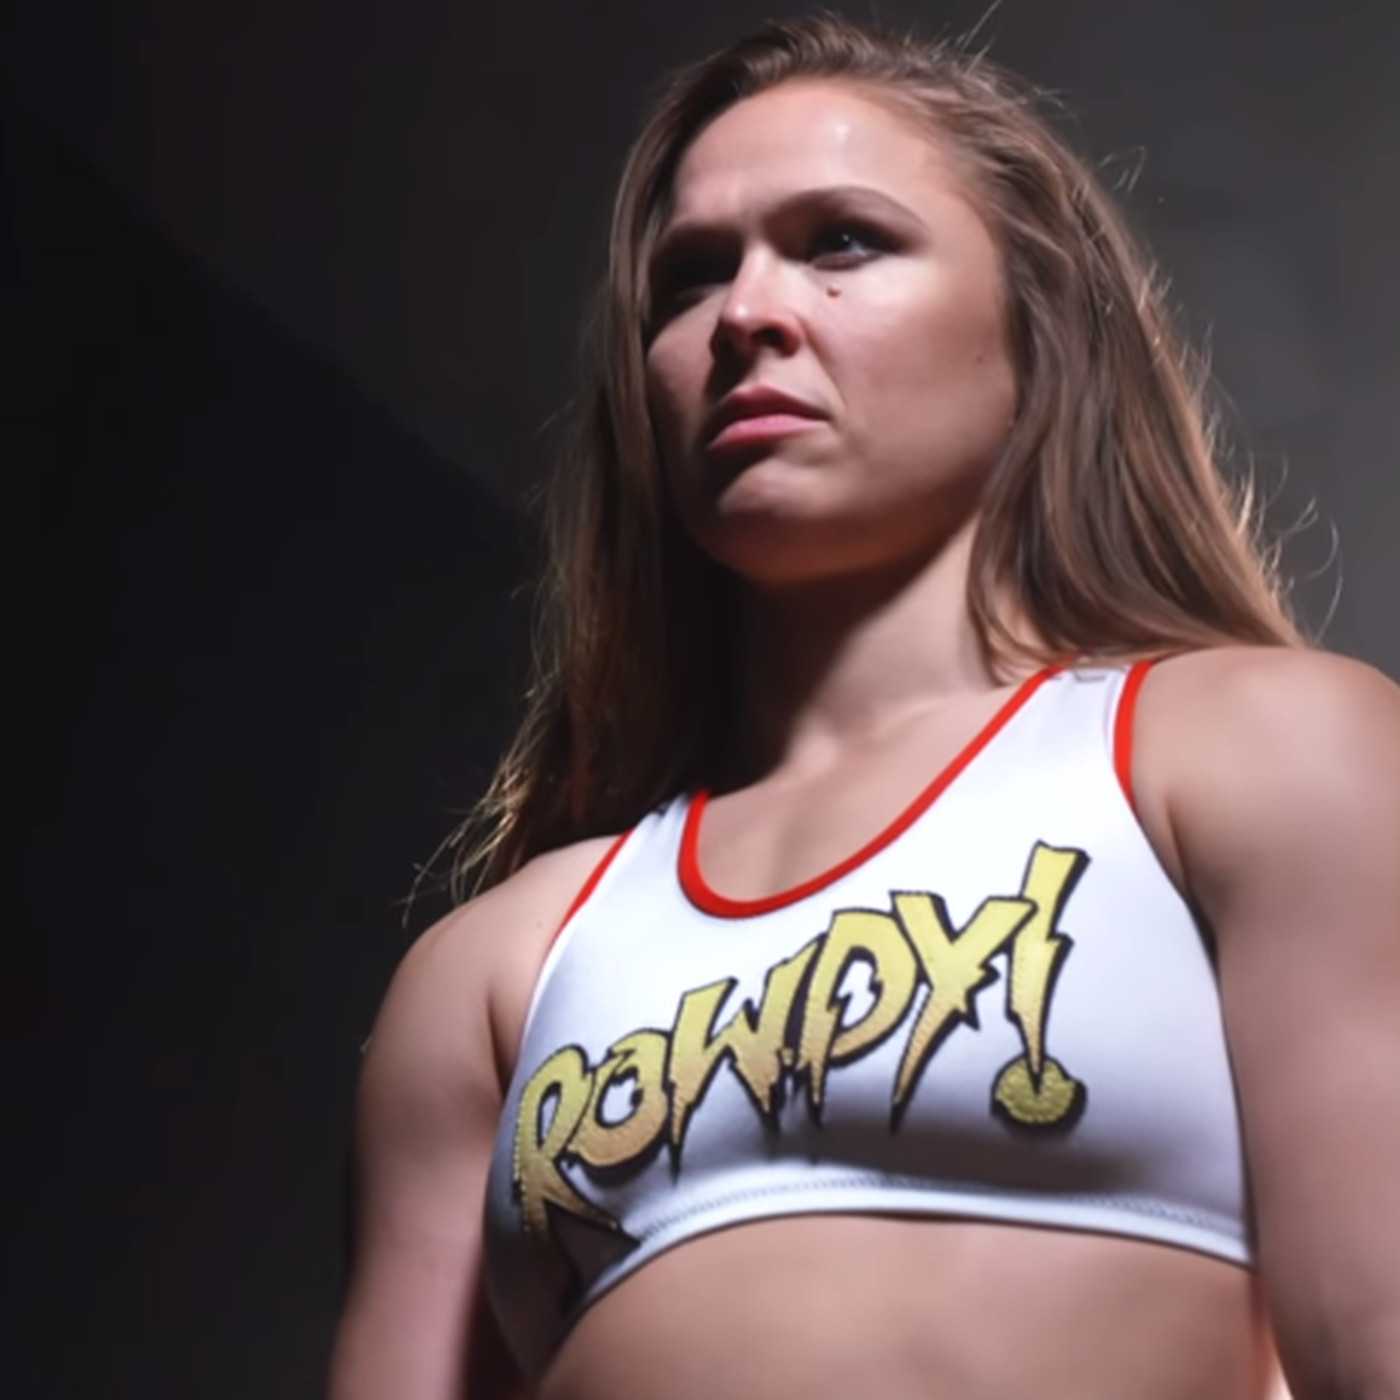 75+ Hot And Sexy Pictures Of Ronda Rousey Explore Her Amazing WWE Bikini Body | Best Of Comic Books